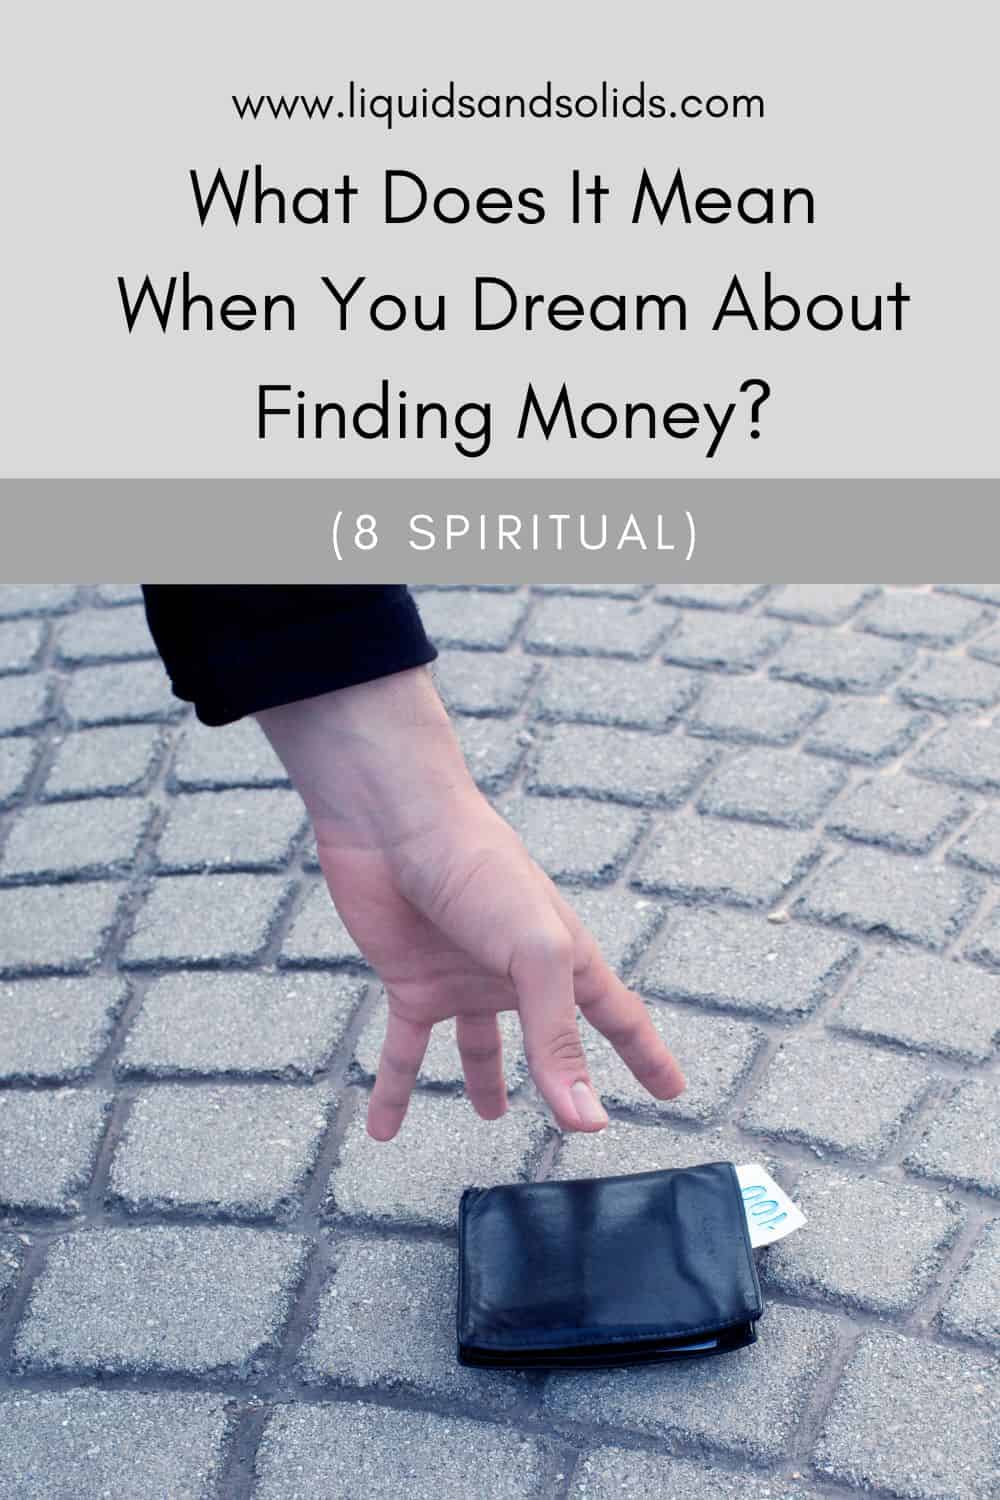 What Does It Mean When You Dream About Finding Money? (8 Spiritual)